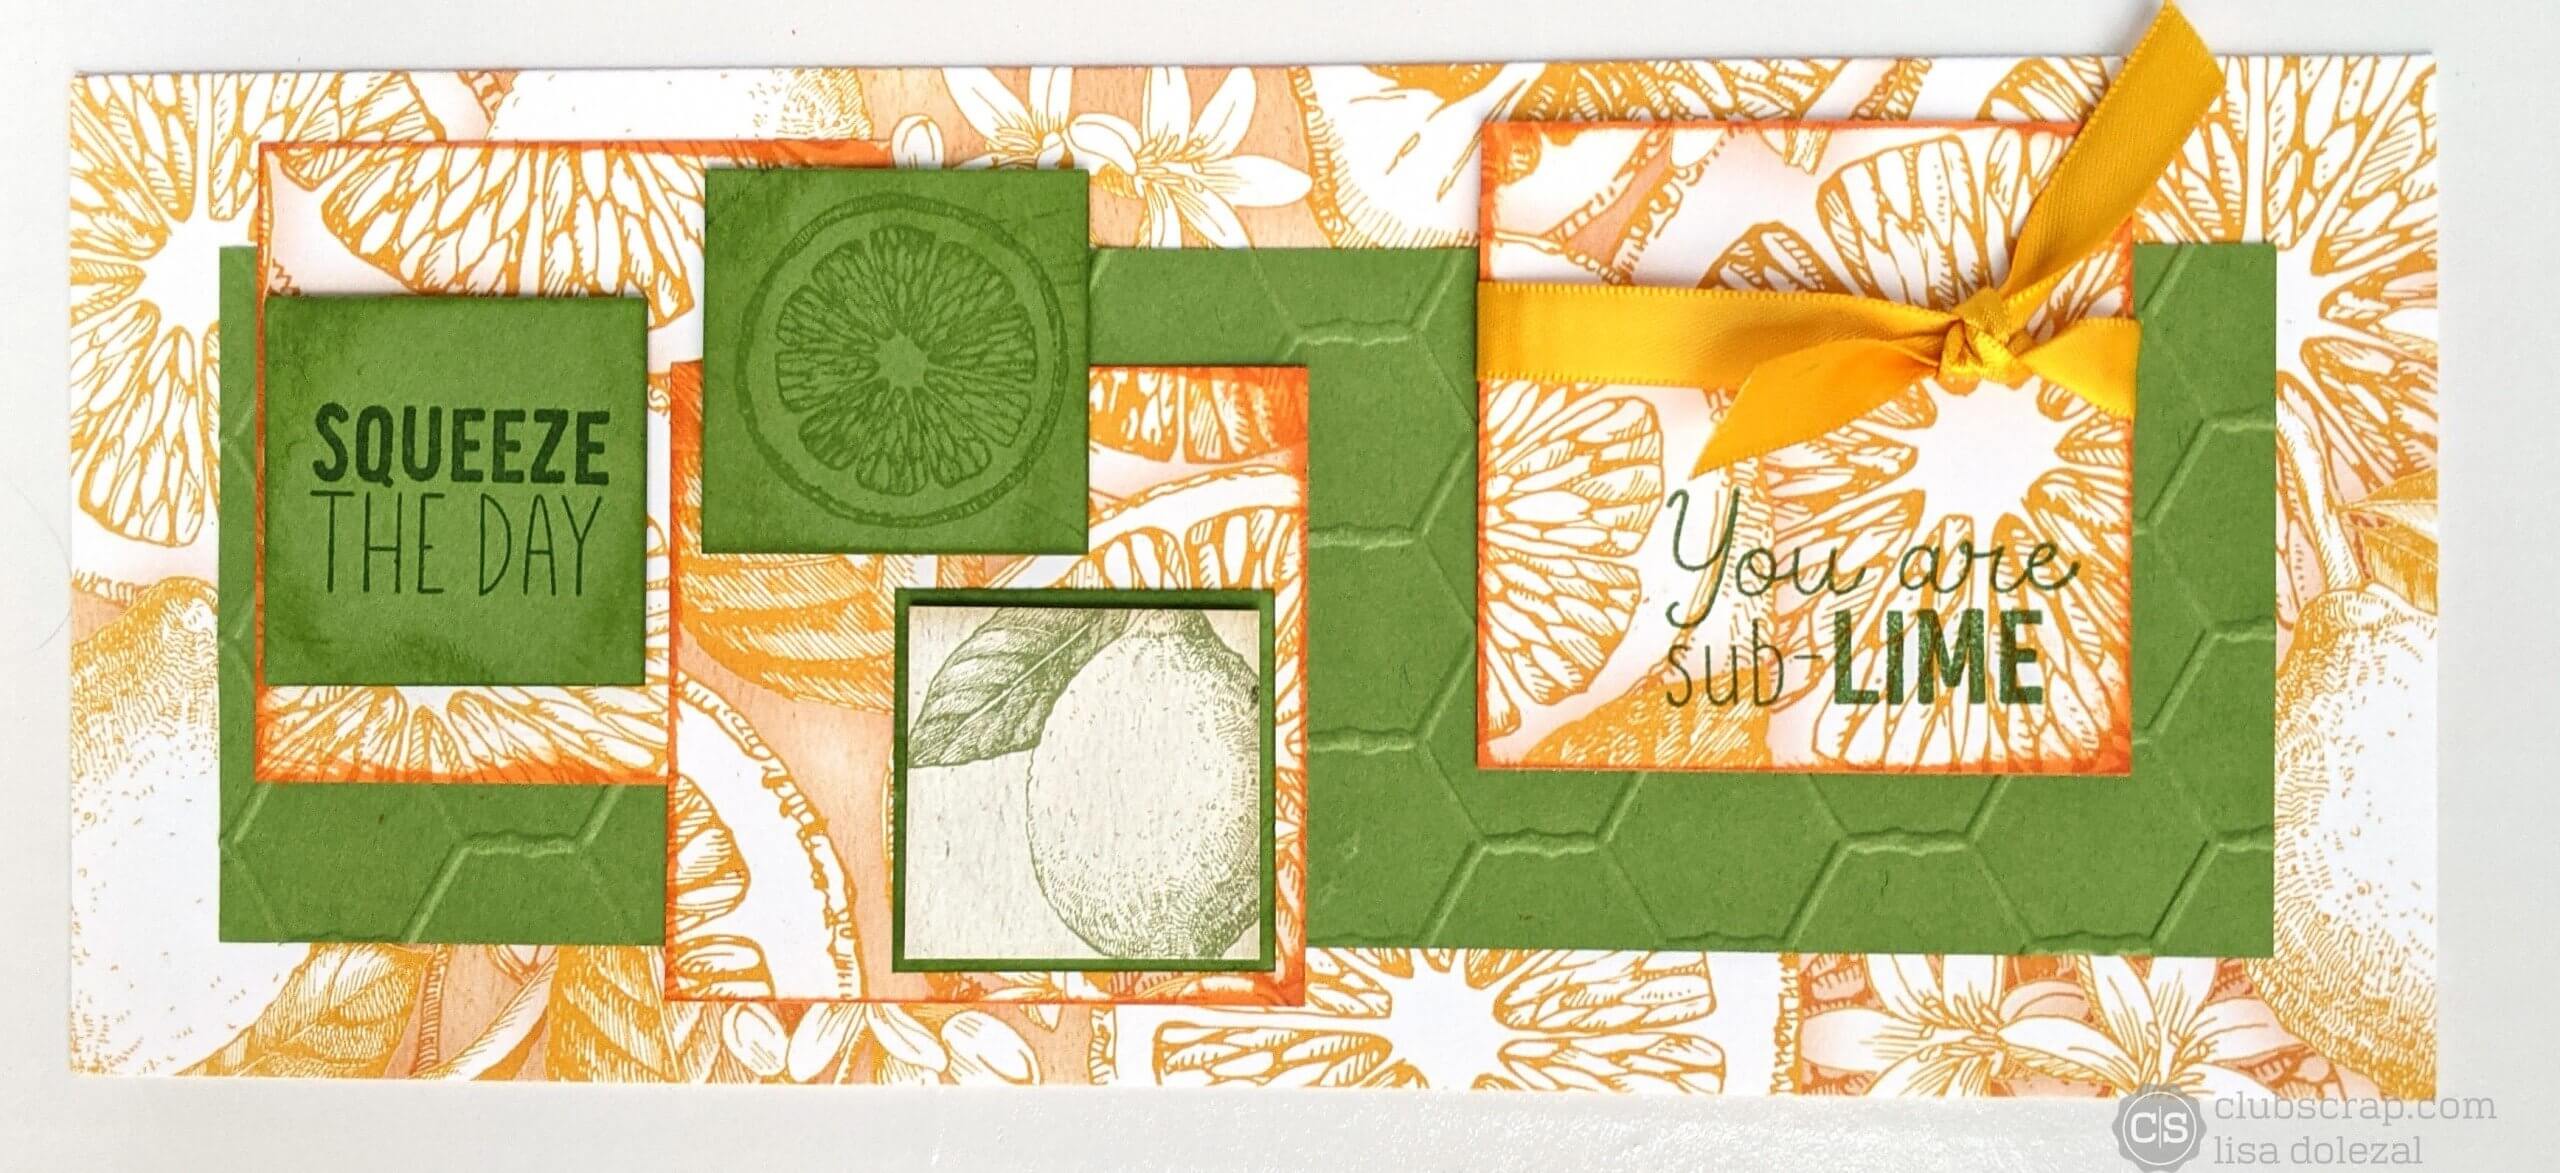 Make Zest for Life slimline cards from the January Page kit.